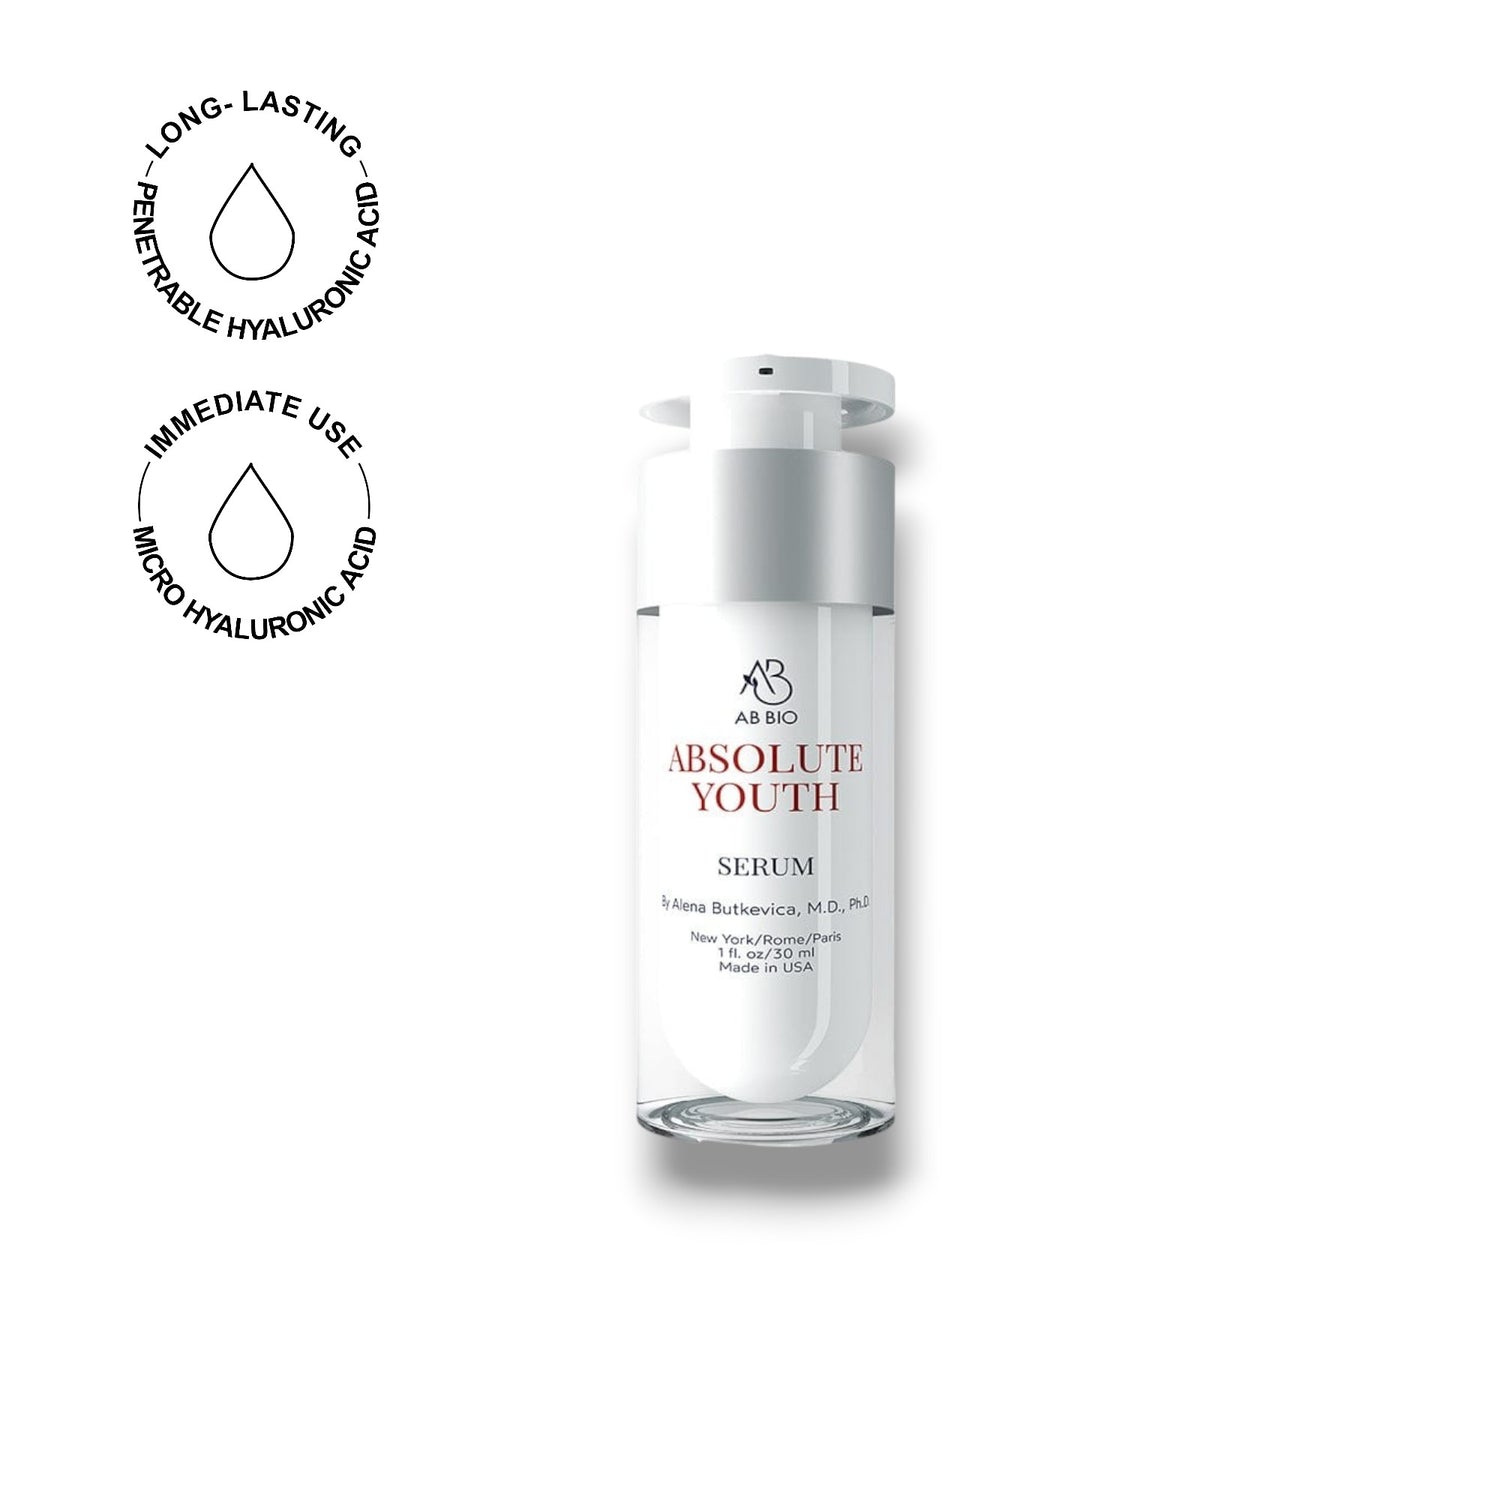 ABSOLUTE YOUTH SERUM for Women–Smoothing and Anti-Aging